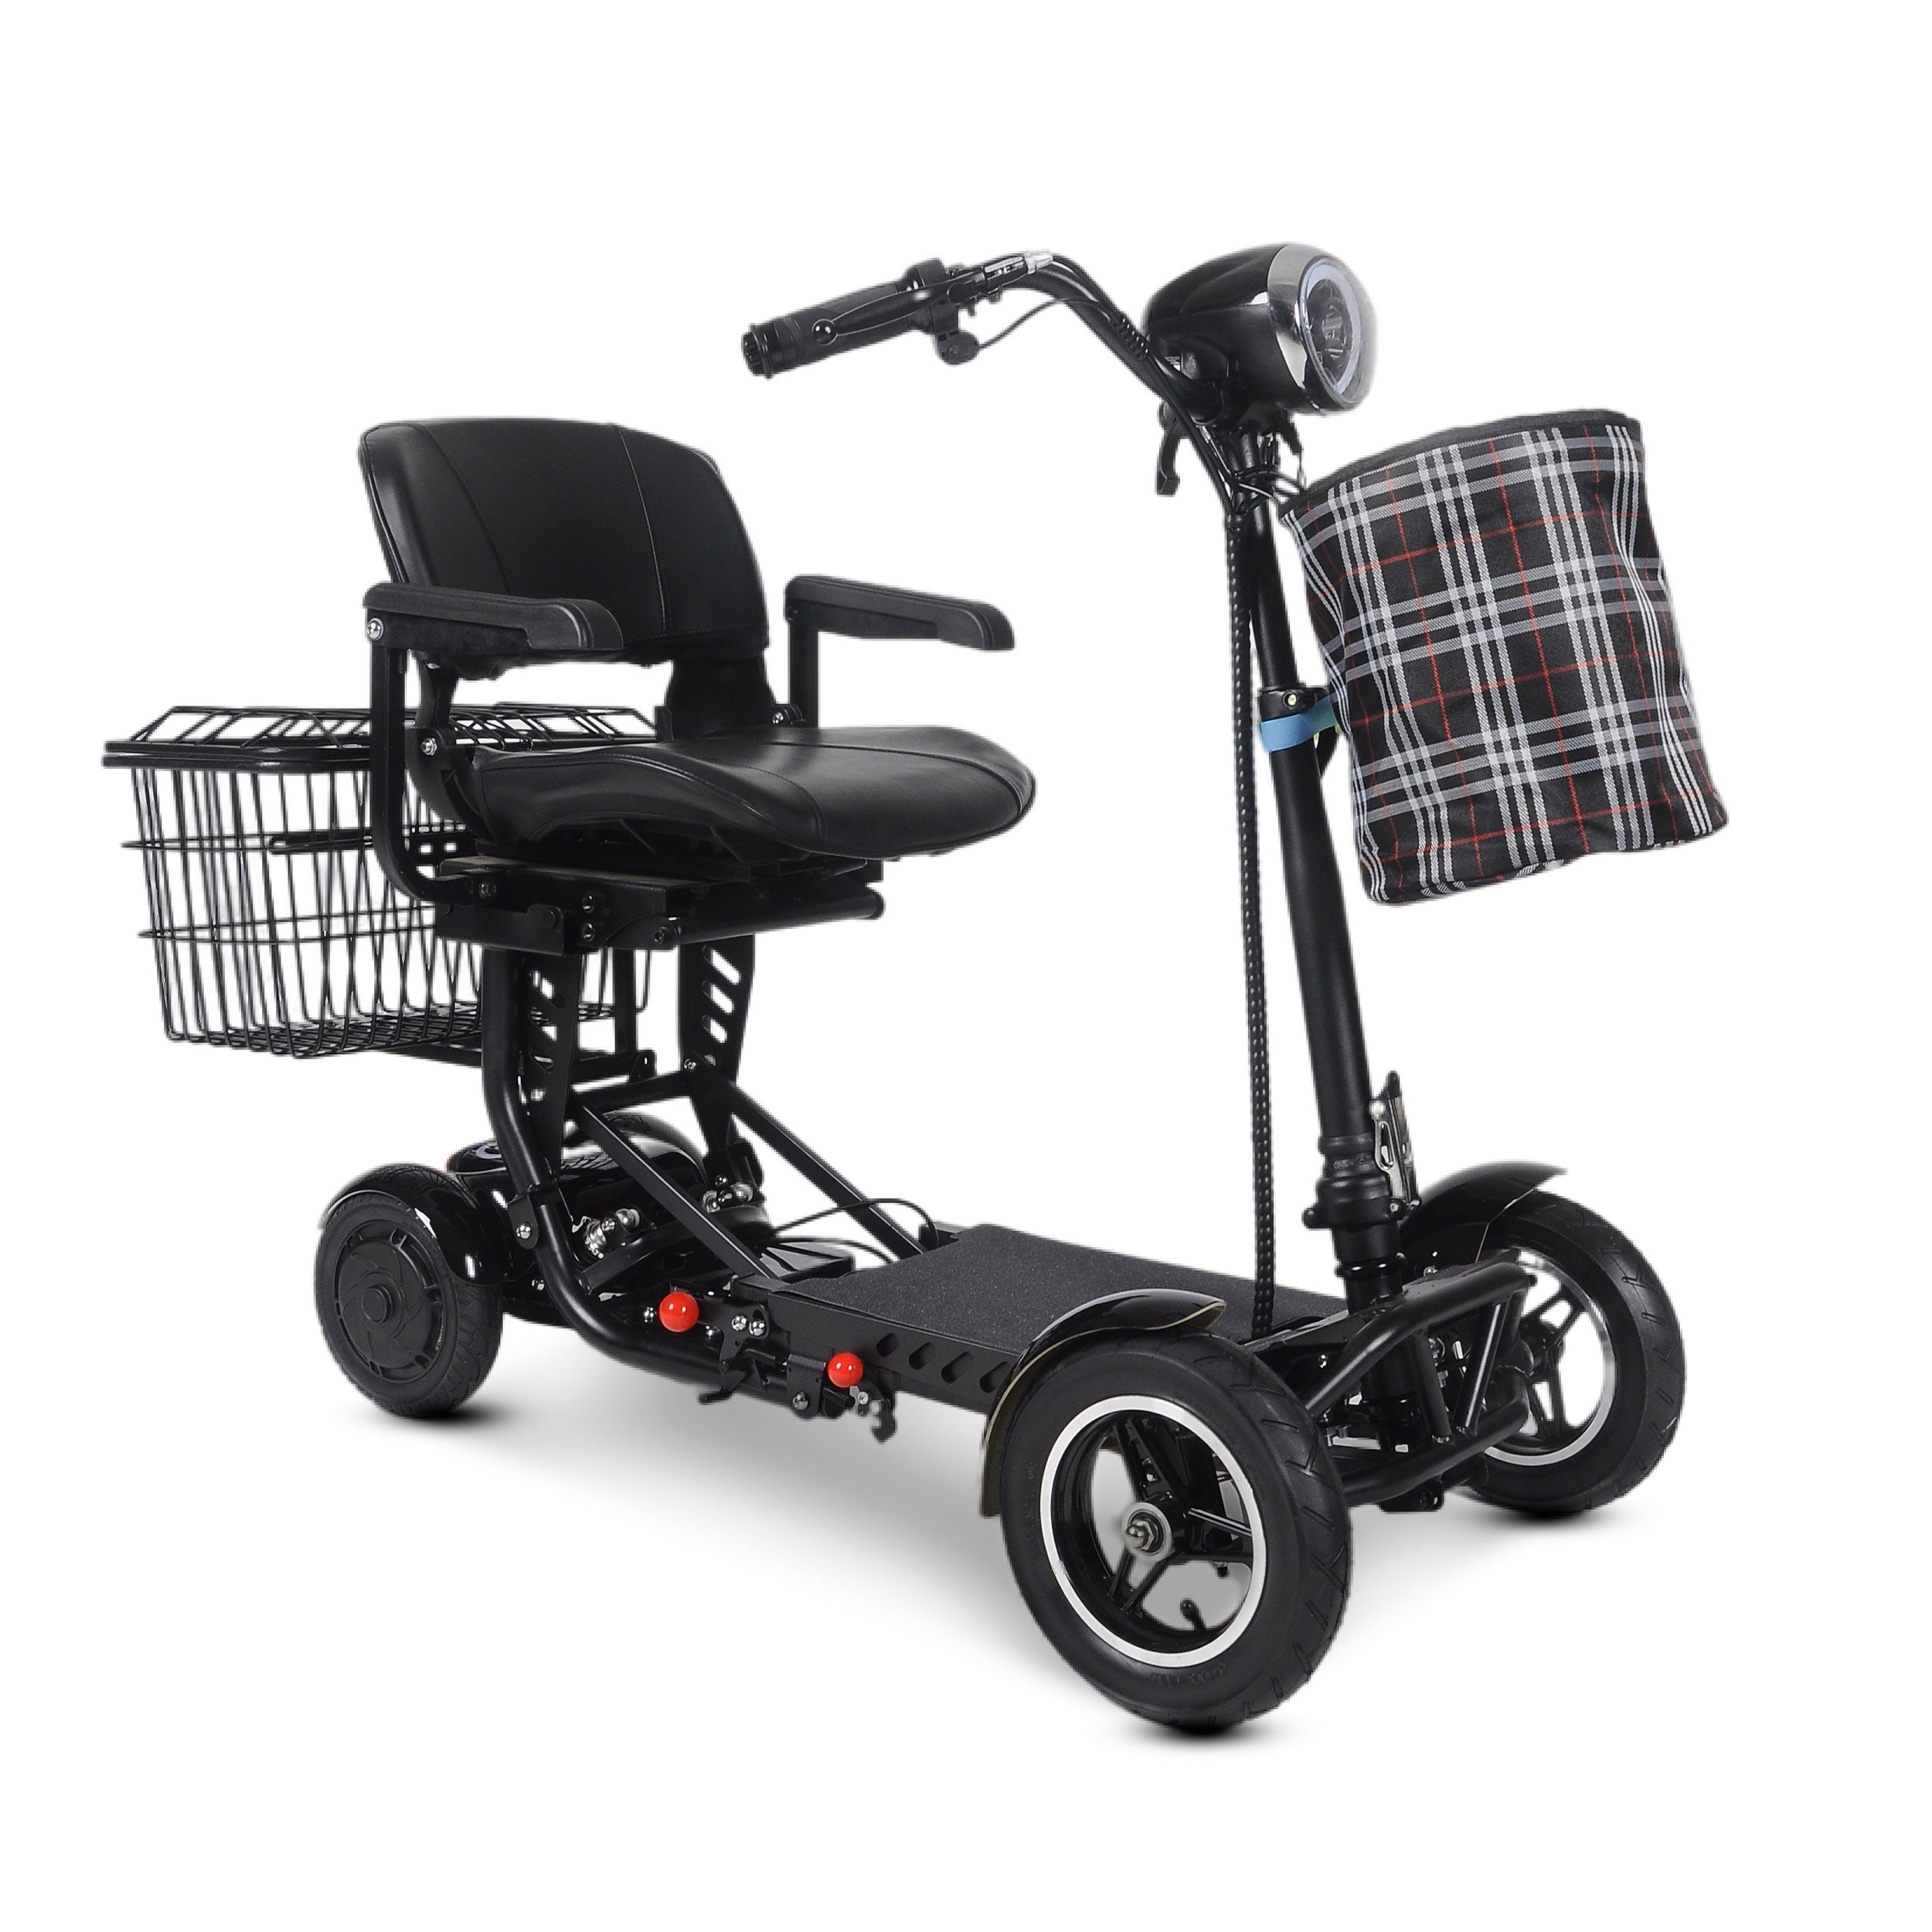 Klano KX30 - All Terrain Foldable Mobility Scooters